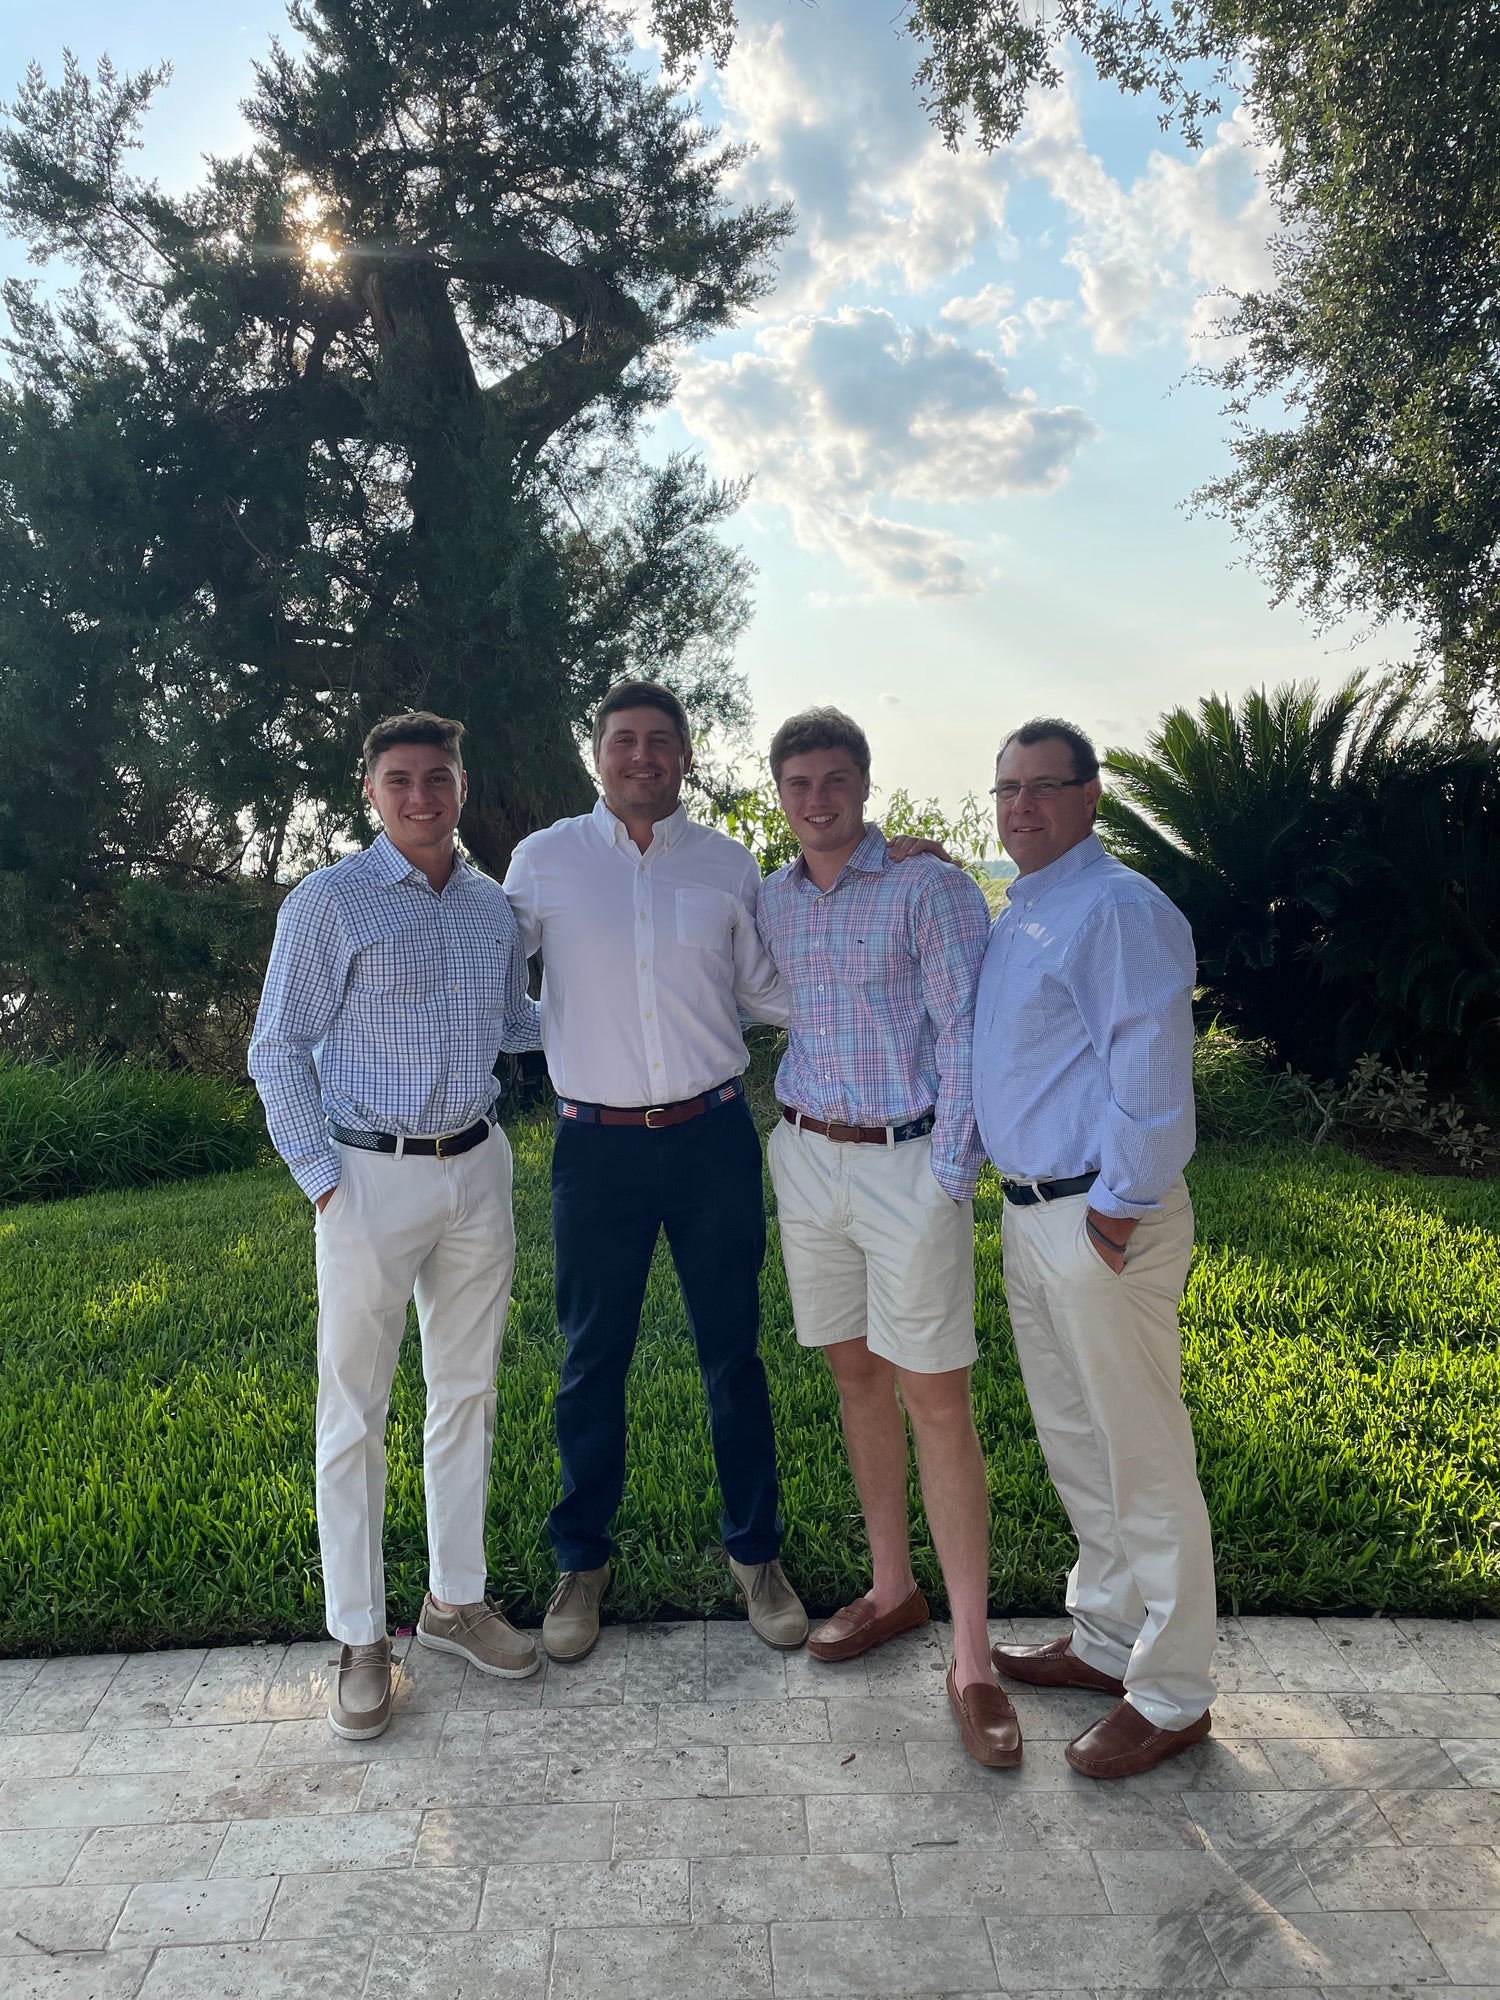 Charleston Belt customers wearing needlepoint belts.  Featuring our brand ambassador Andrew Novak PGA Tour professional golfer and other customers and ambassadors. 